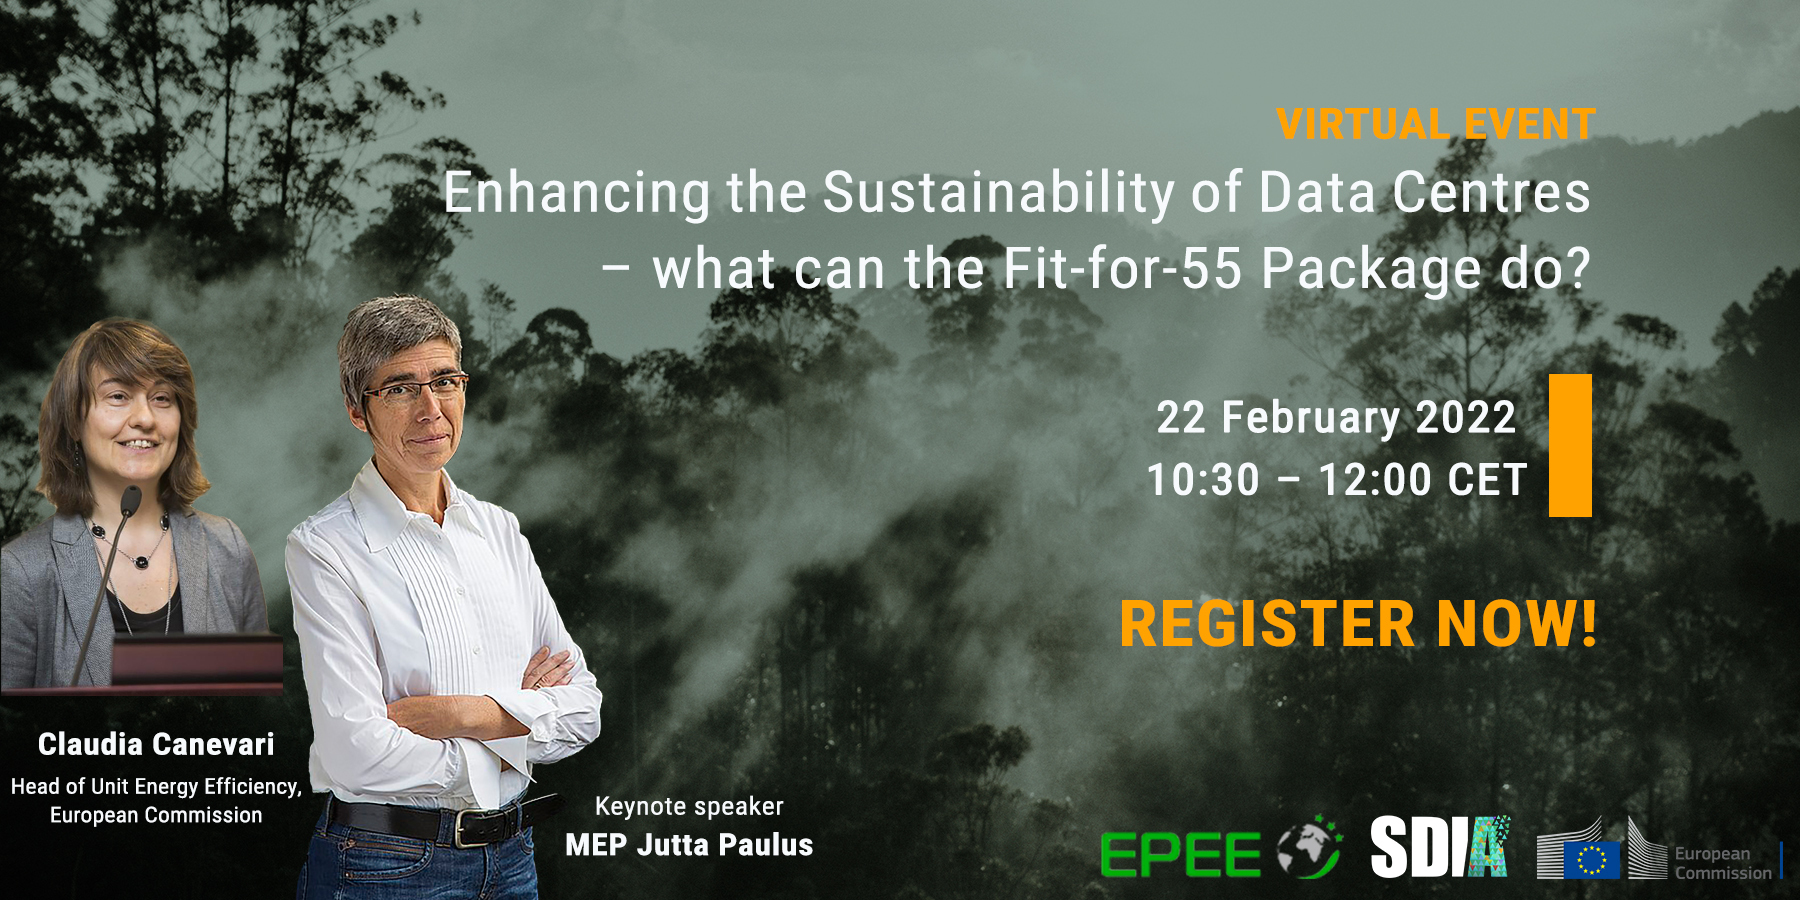 Key insights from EPEE & SDIA event - 'Enhancing the Sustainability of Data Centres - what can the Fit-for-55 Package do?'